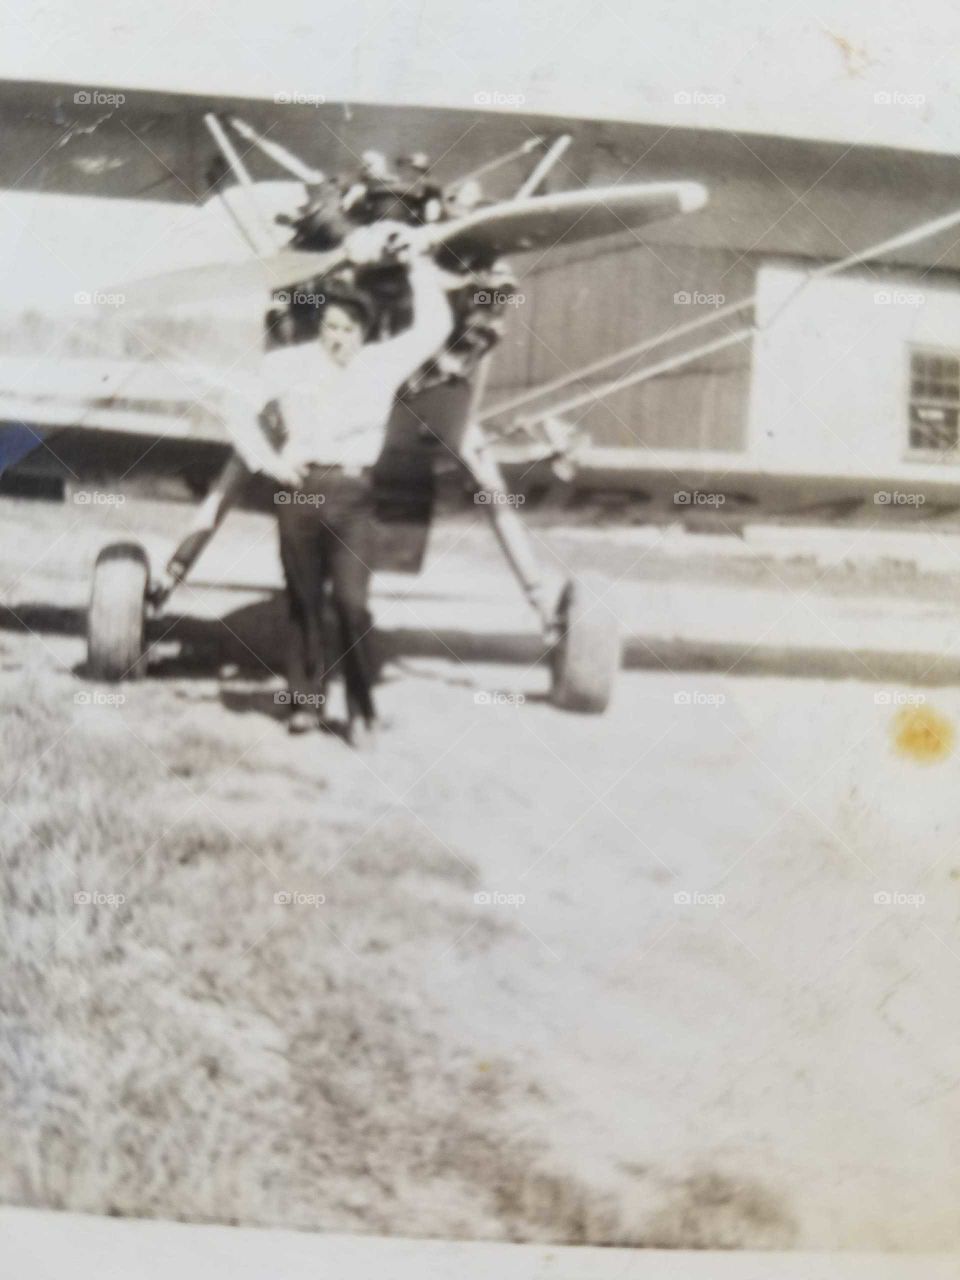 a picture I found of my uncle who was a pilot and owned his own plane in the 1940's